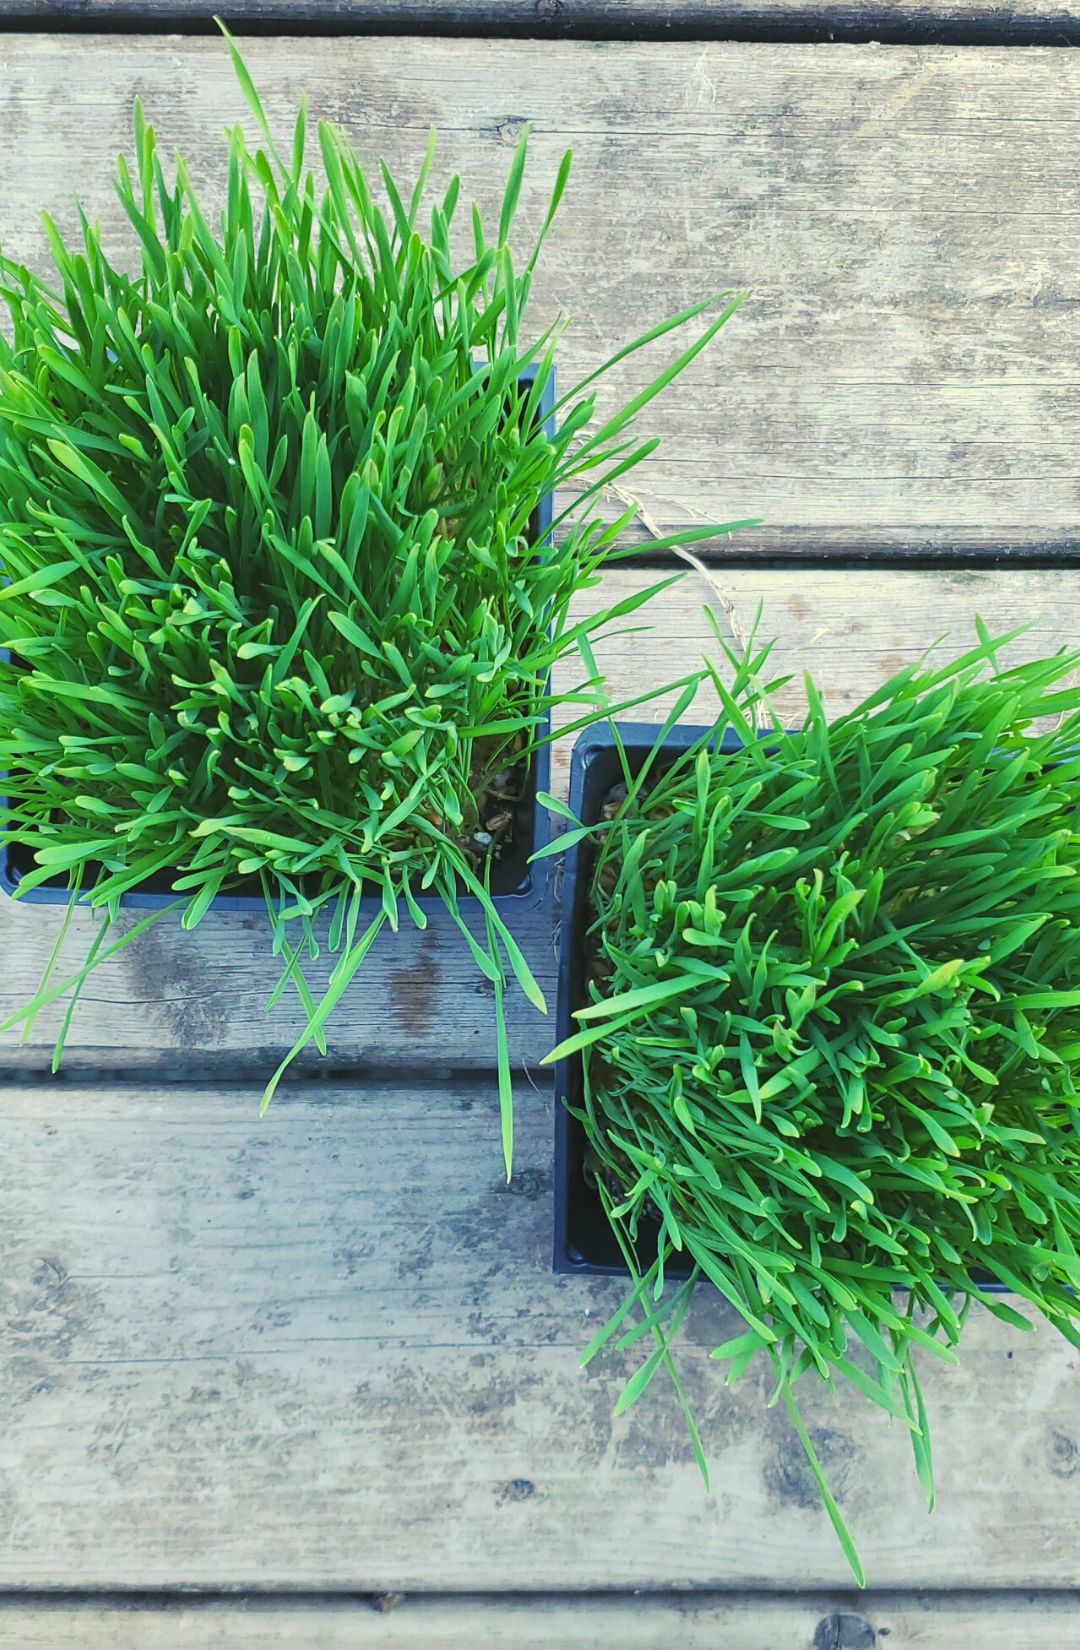 Hunters' Dale wheatgrass and oatgrass, grown in the Fraser valley.